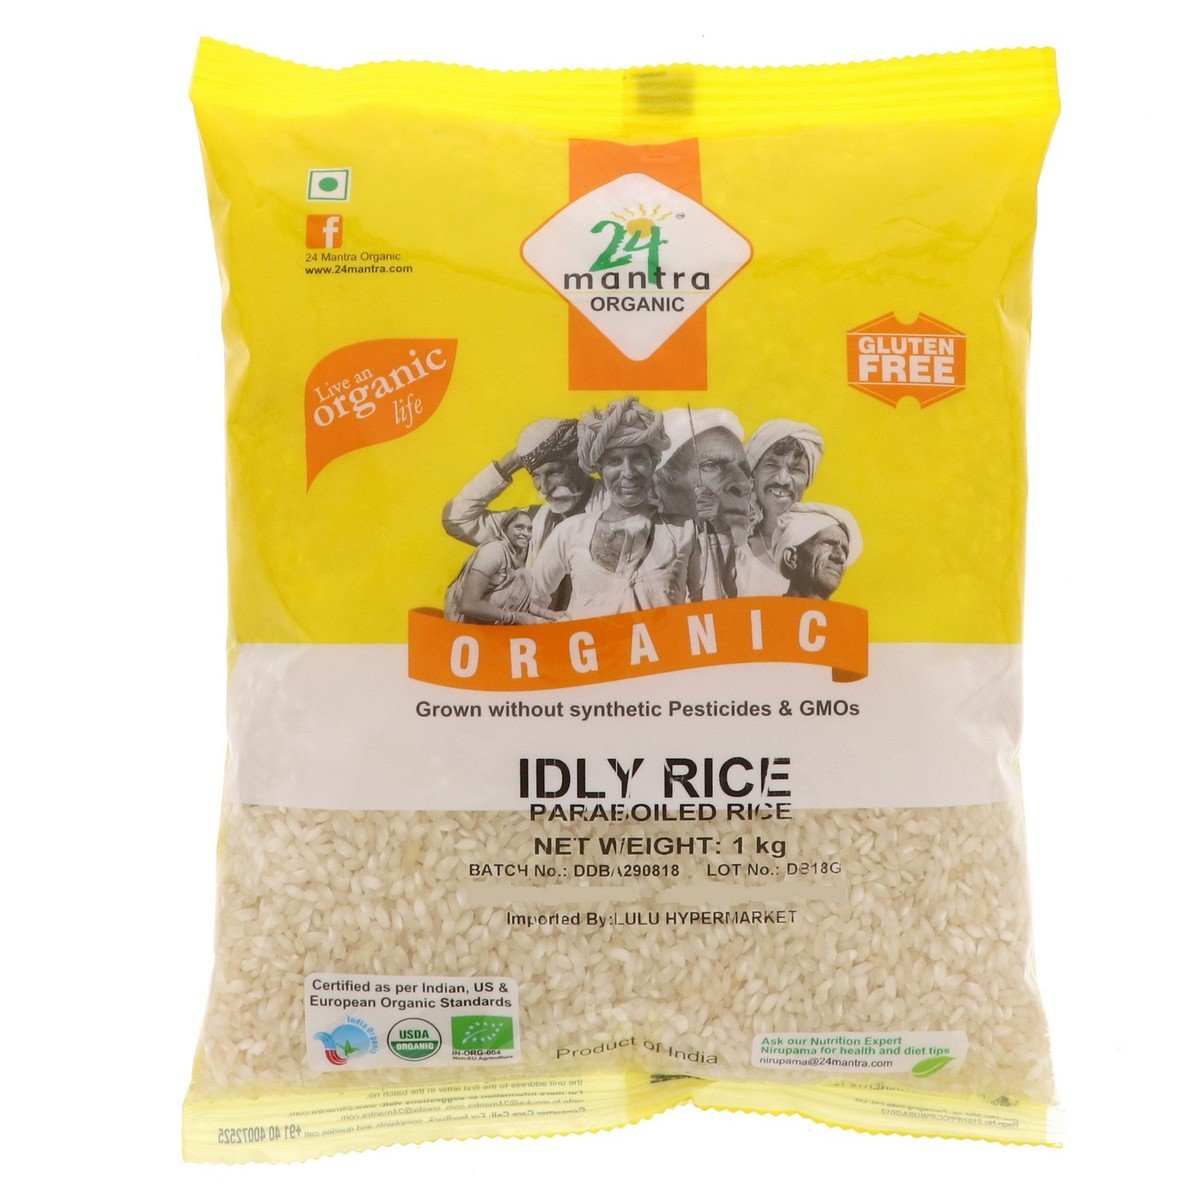 Buy 24 Mantra Organic Idly Rice Paraboiled Rice 1 kg Online at Best Price | Indian Ethnic Rice | Lulu Kuwait in UAE